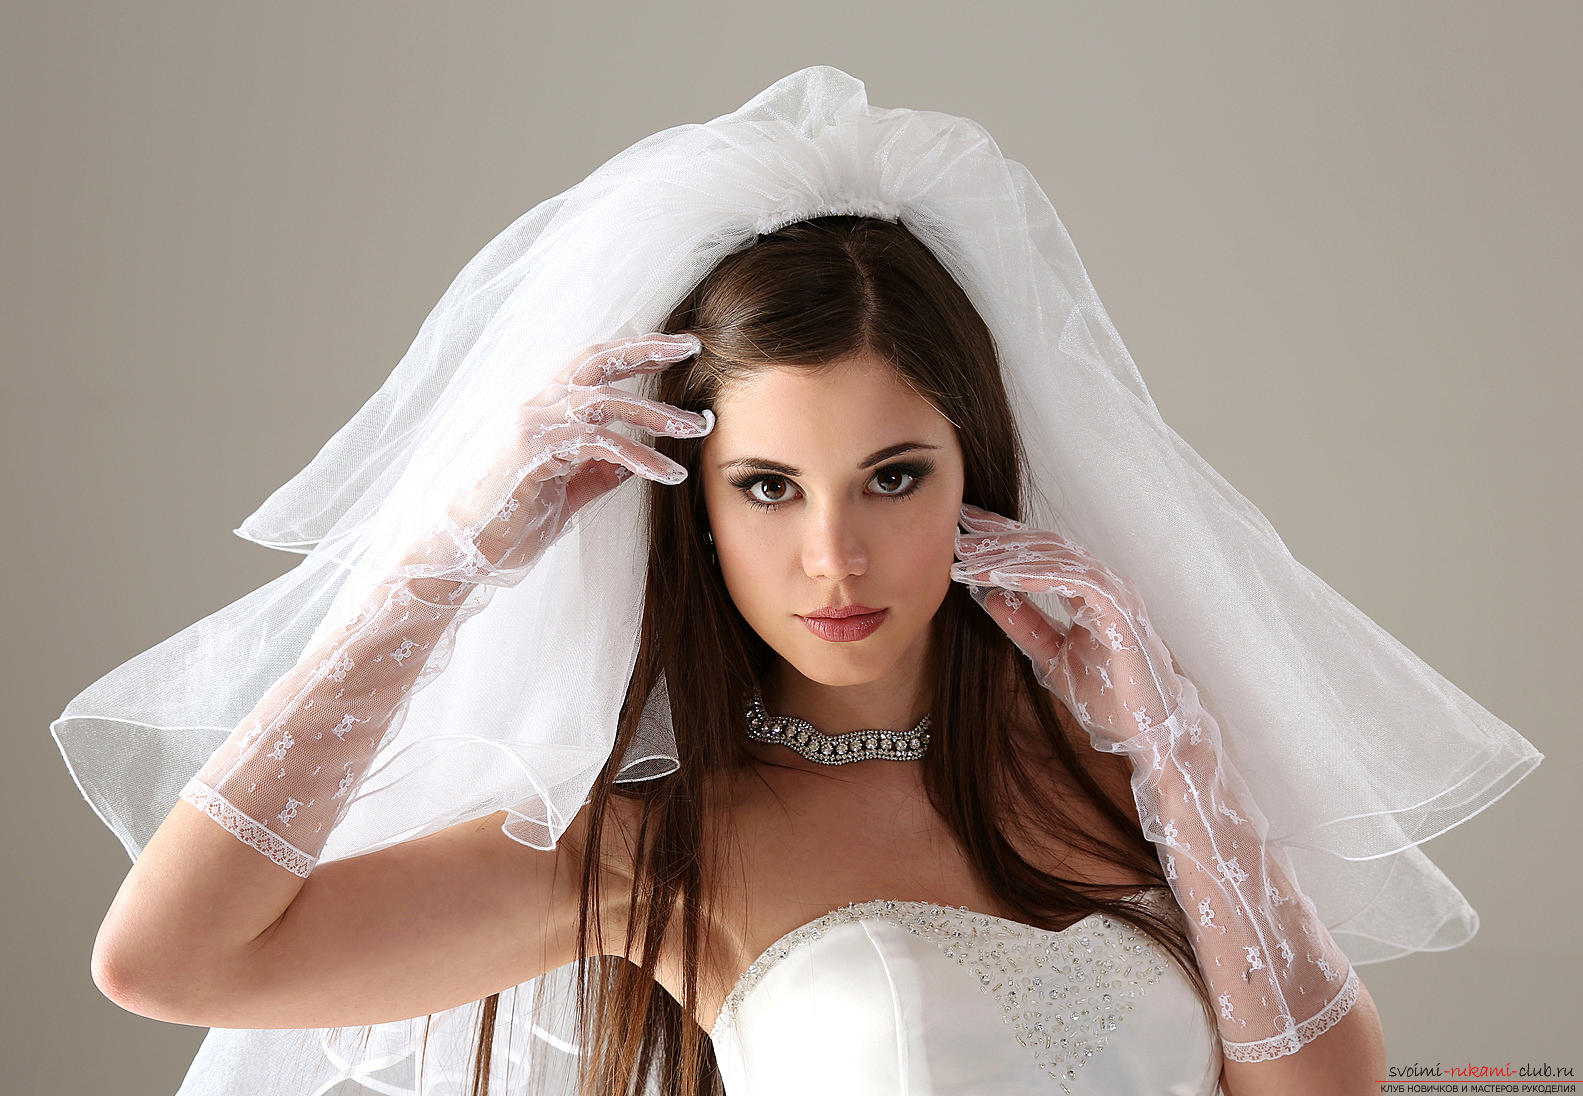 Hairstyles for the bride for the wedding with the veil. Photo # 2